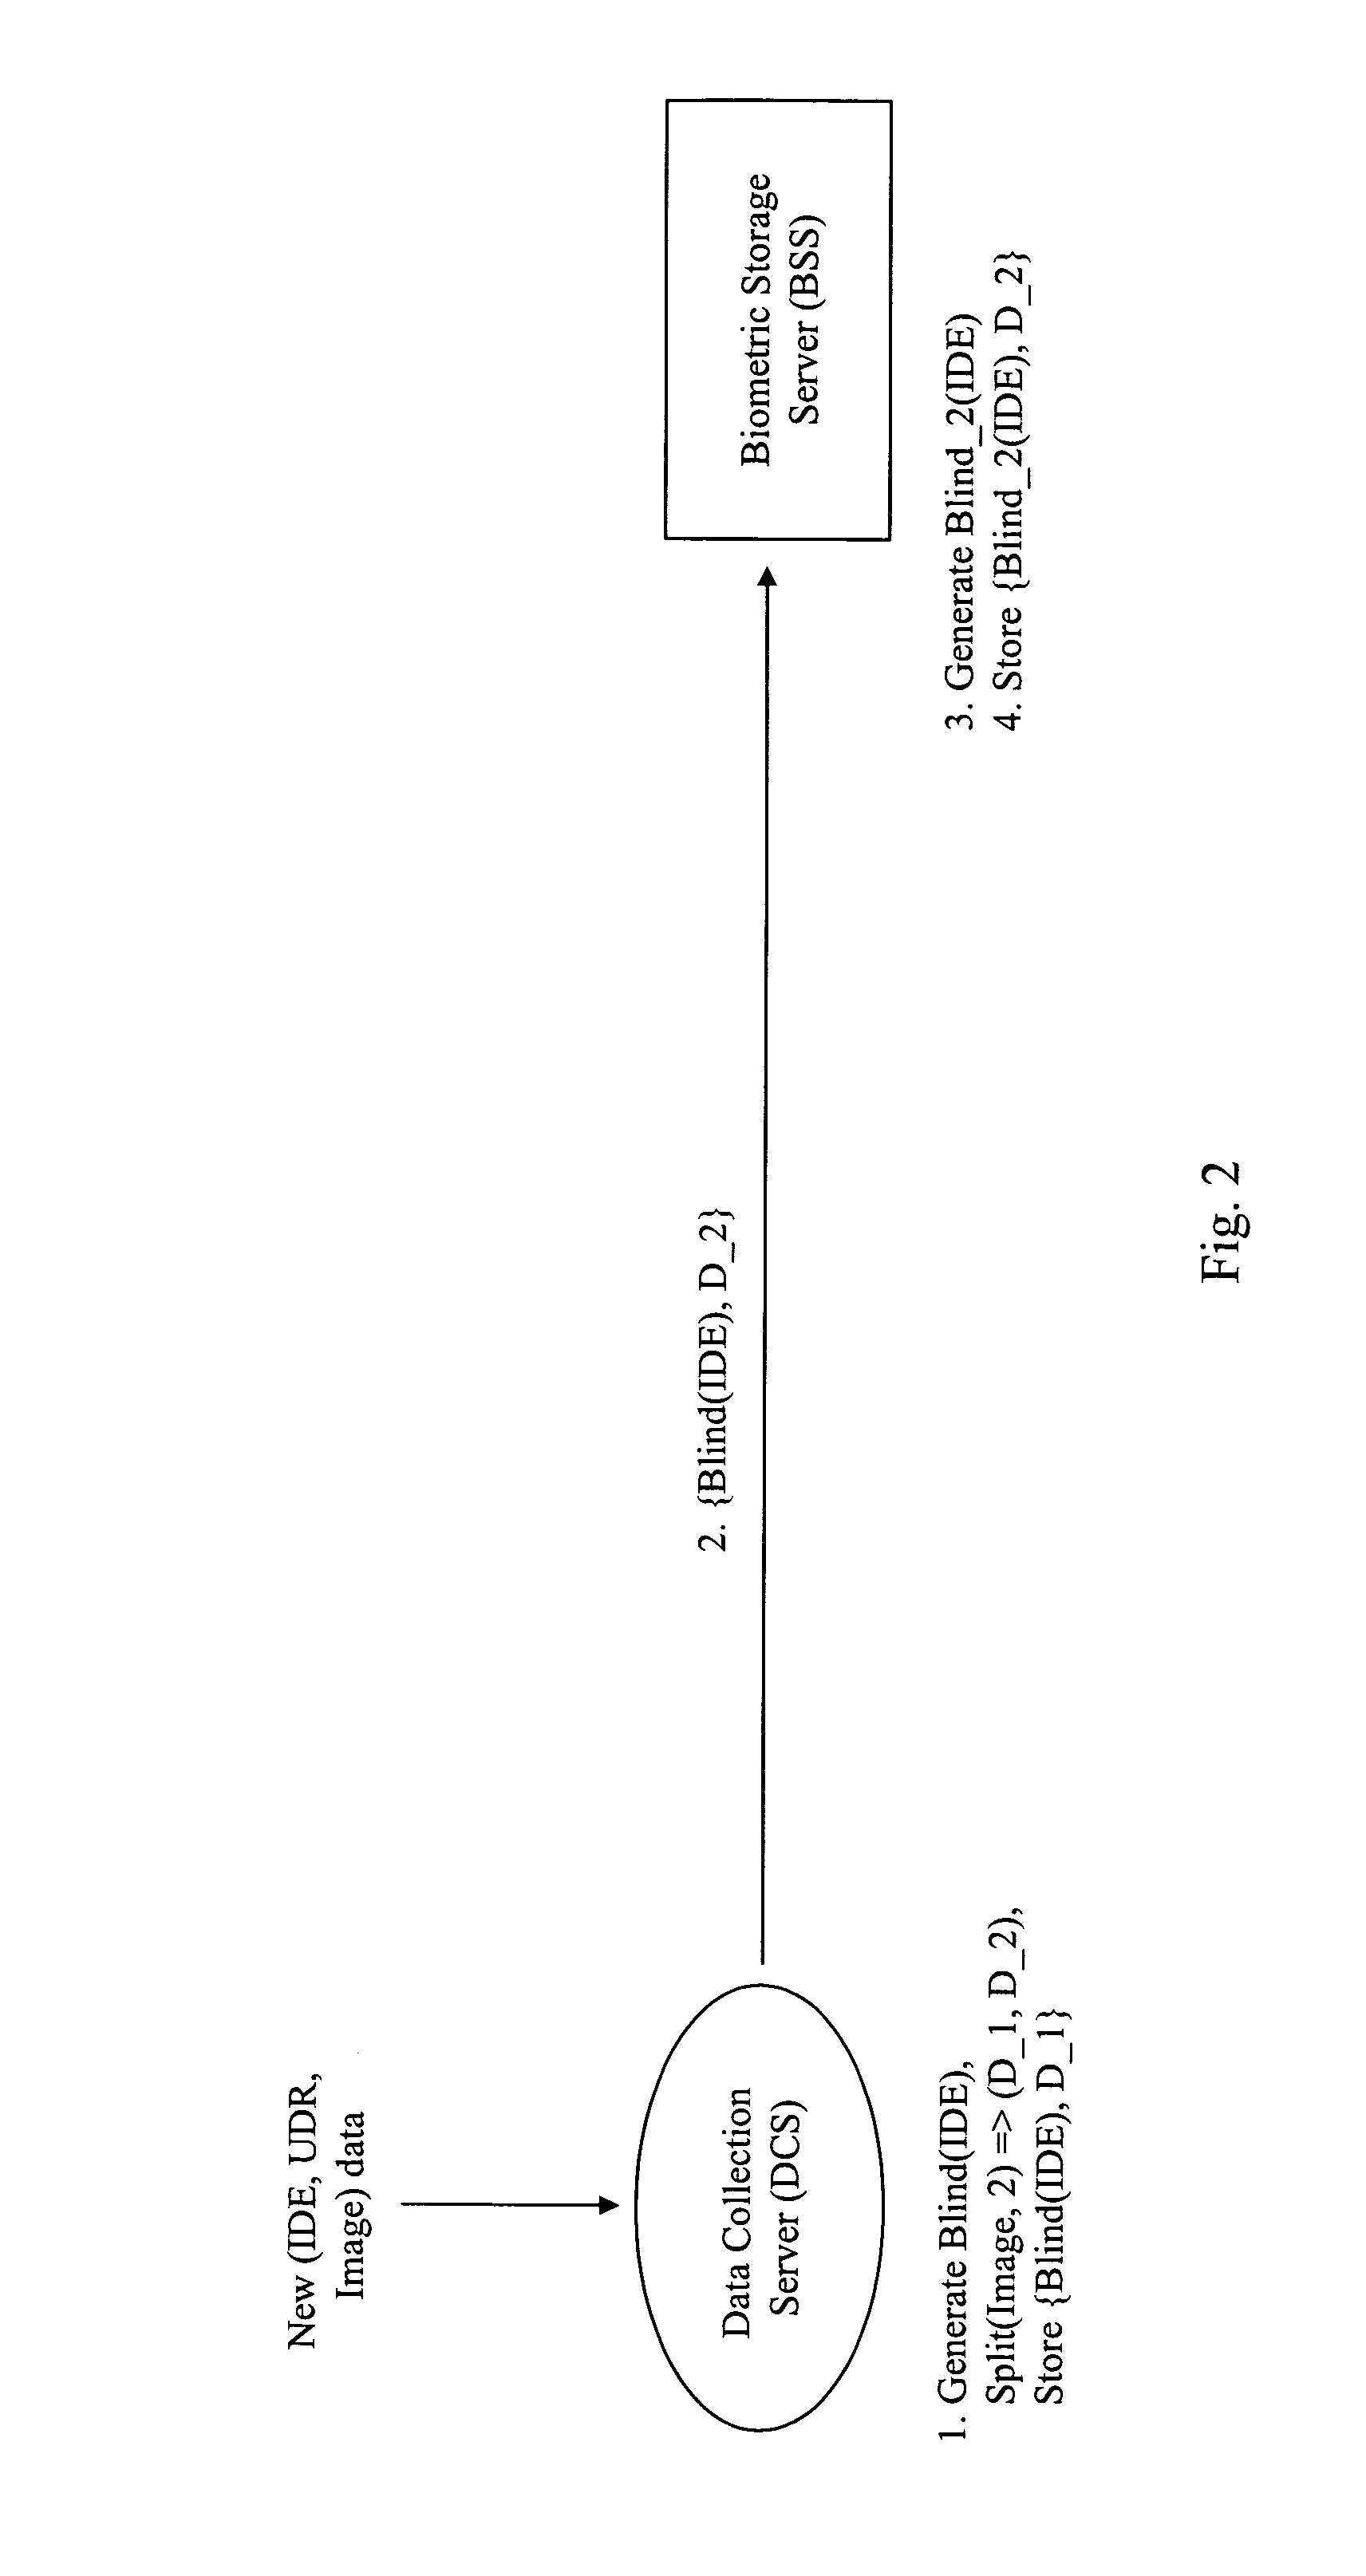 System and method for protecting the privacy and security of stored biometric data